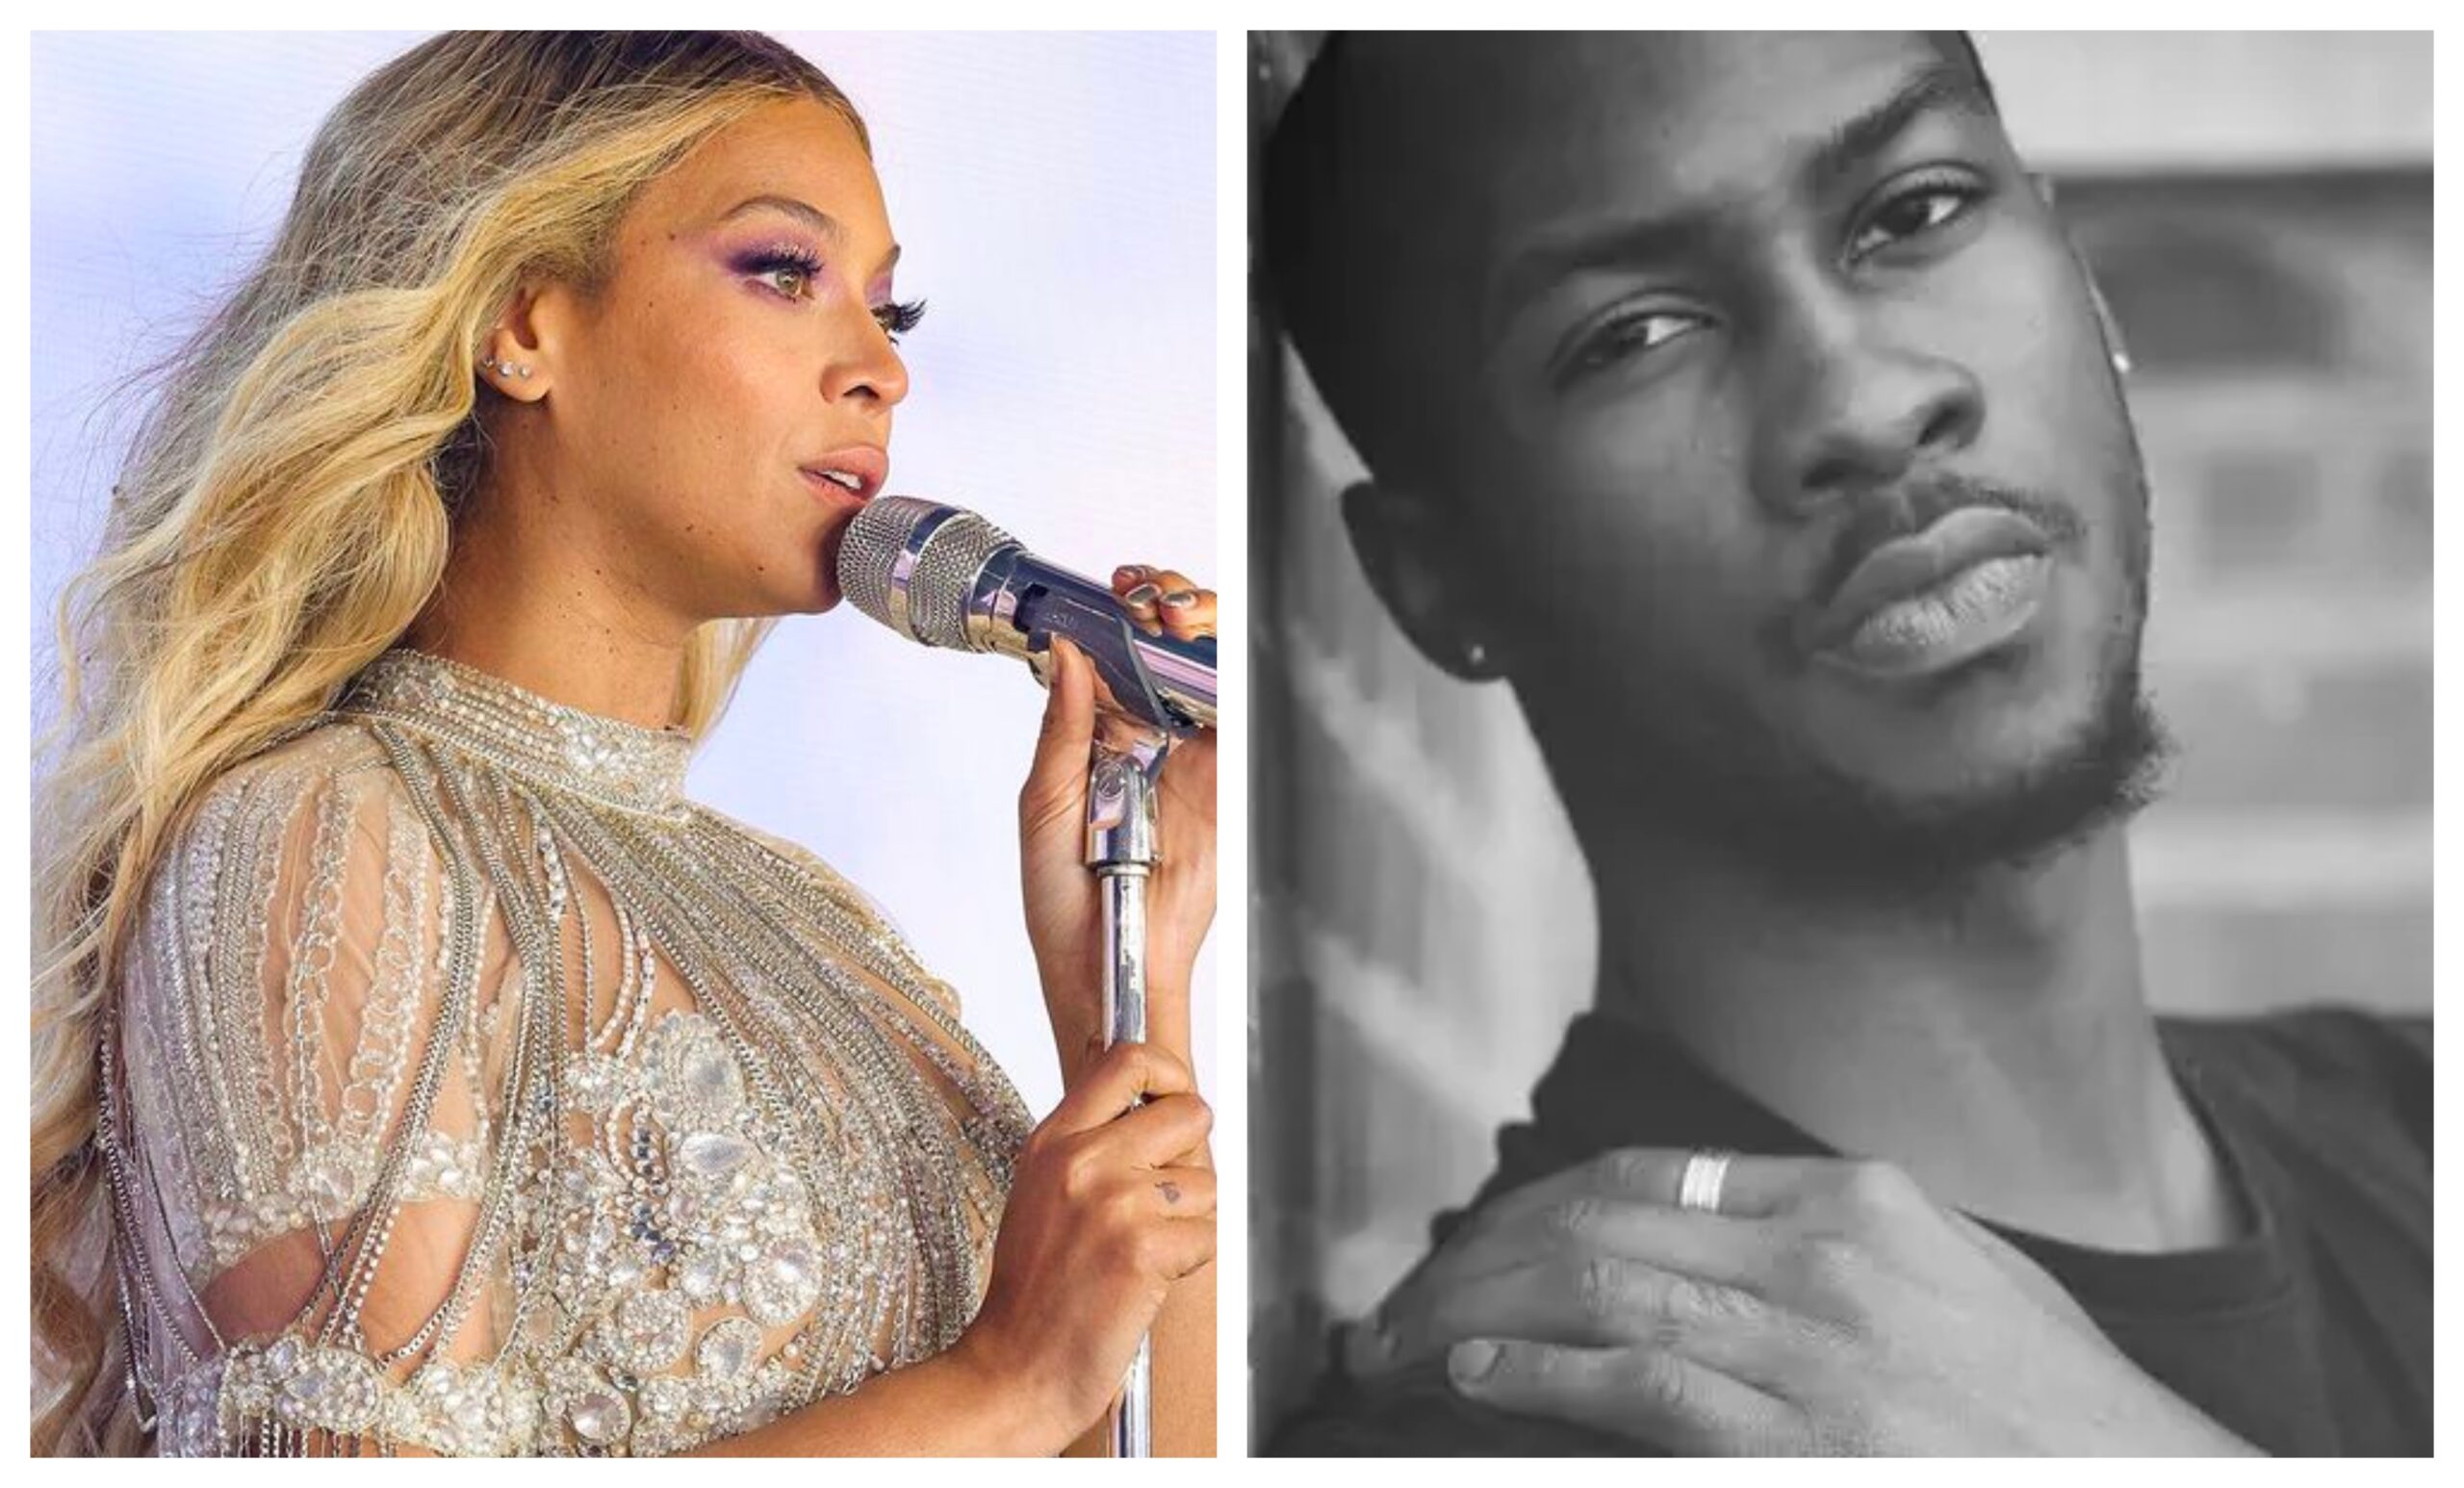 Beyonce Pays Tribute to O’Shae Sibley, Man Killed in Alleged Homophobic Attack